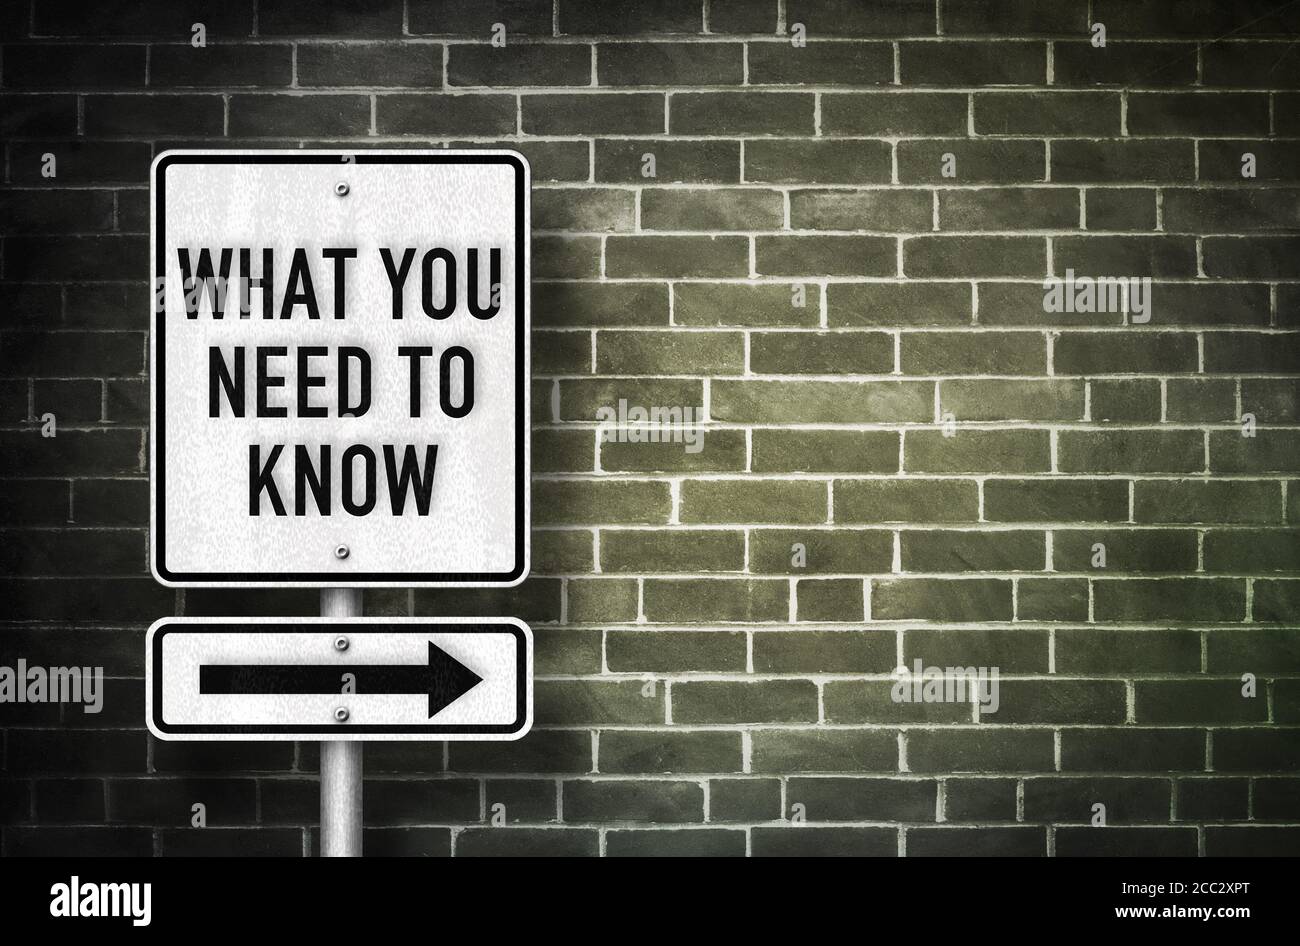 What you need to know - roadsign message Stock Photo